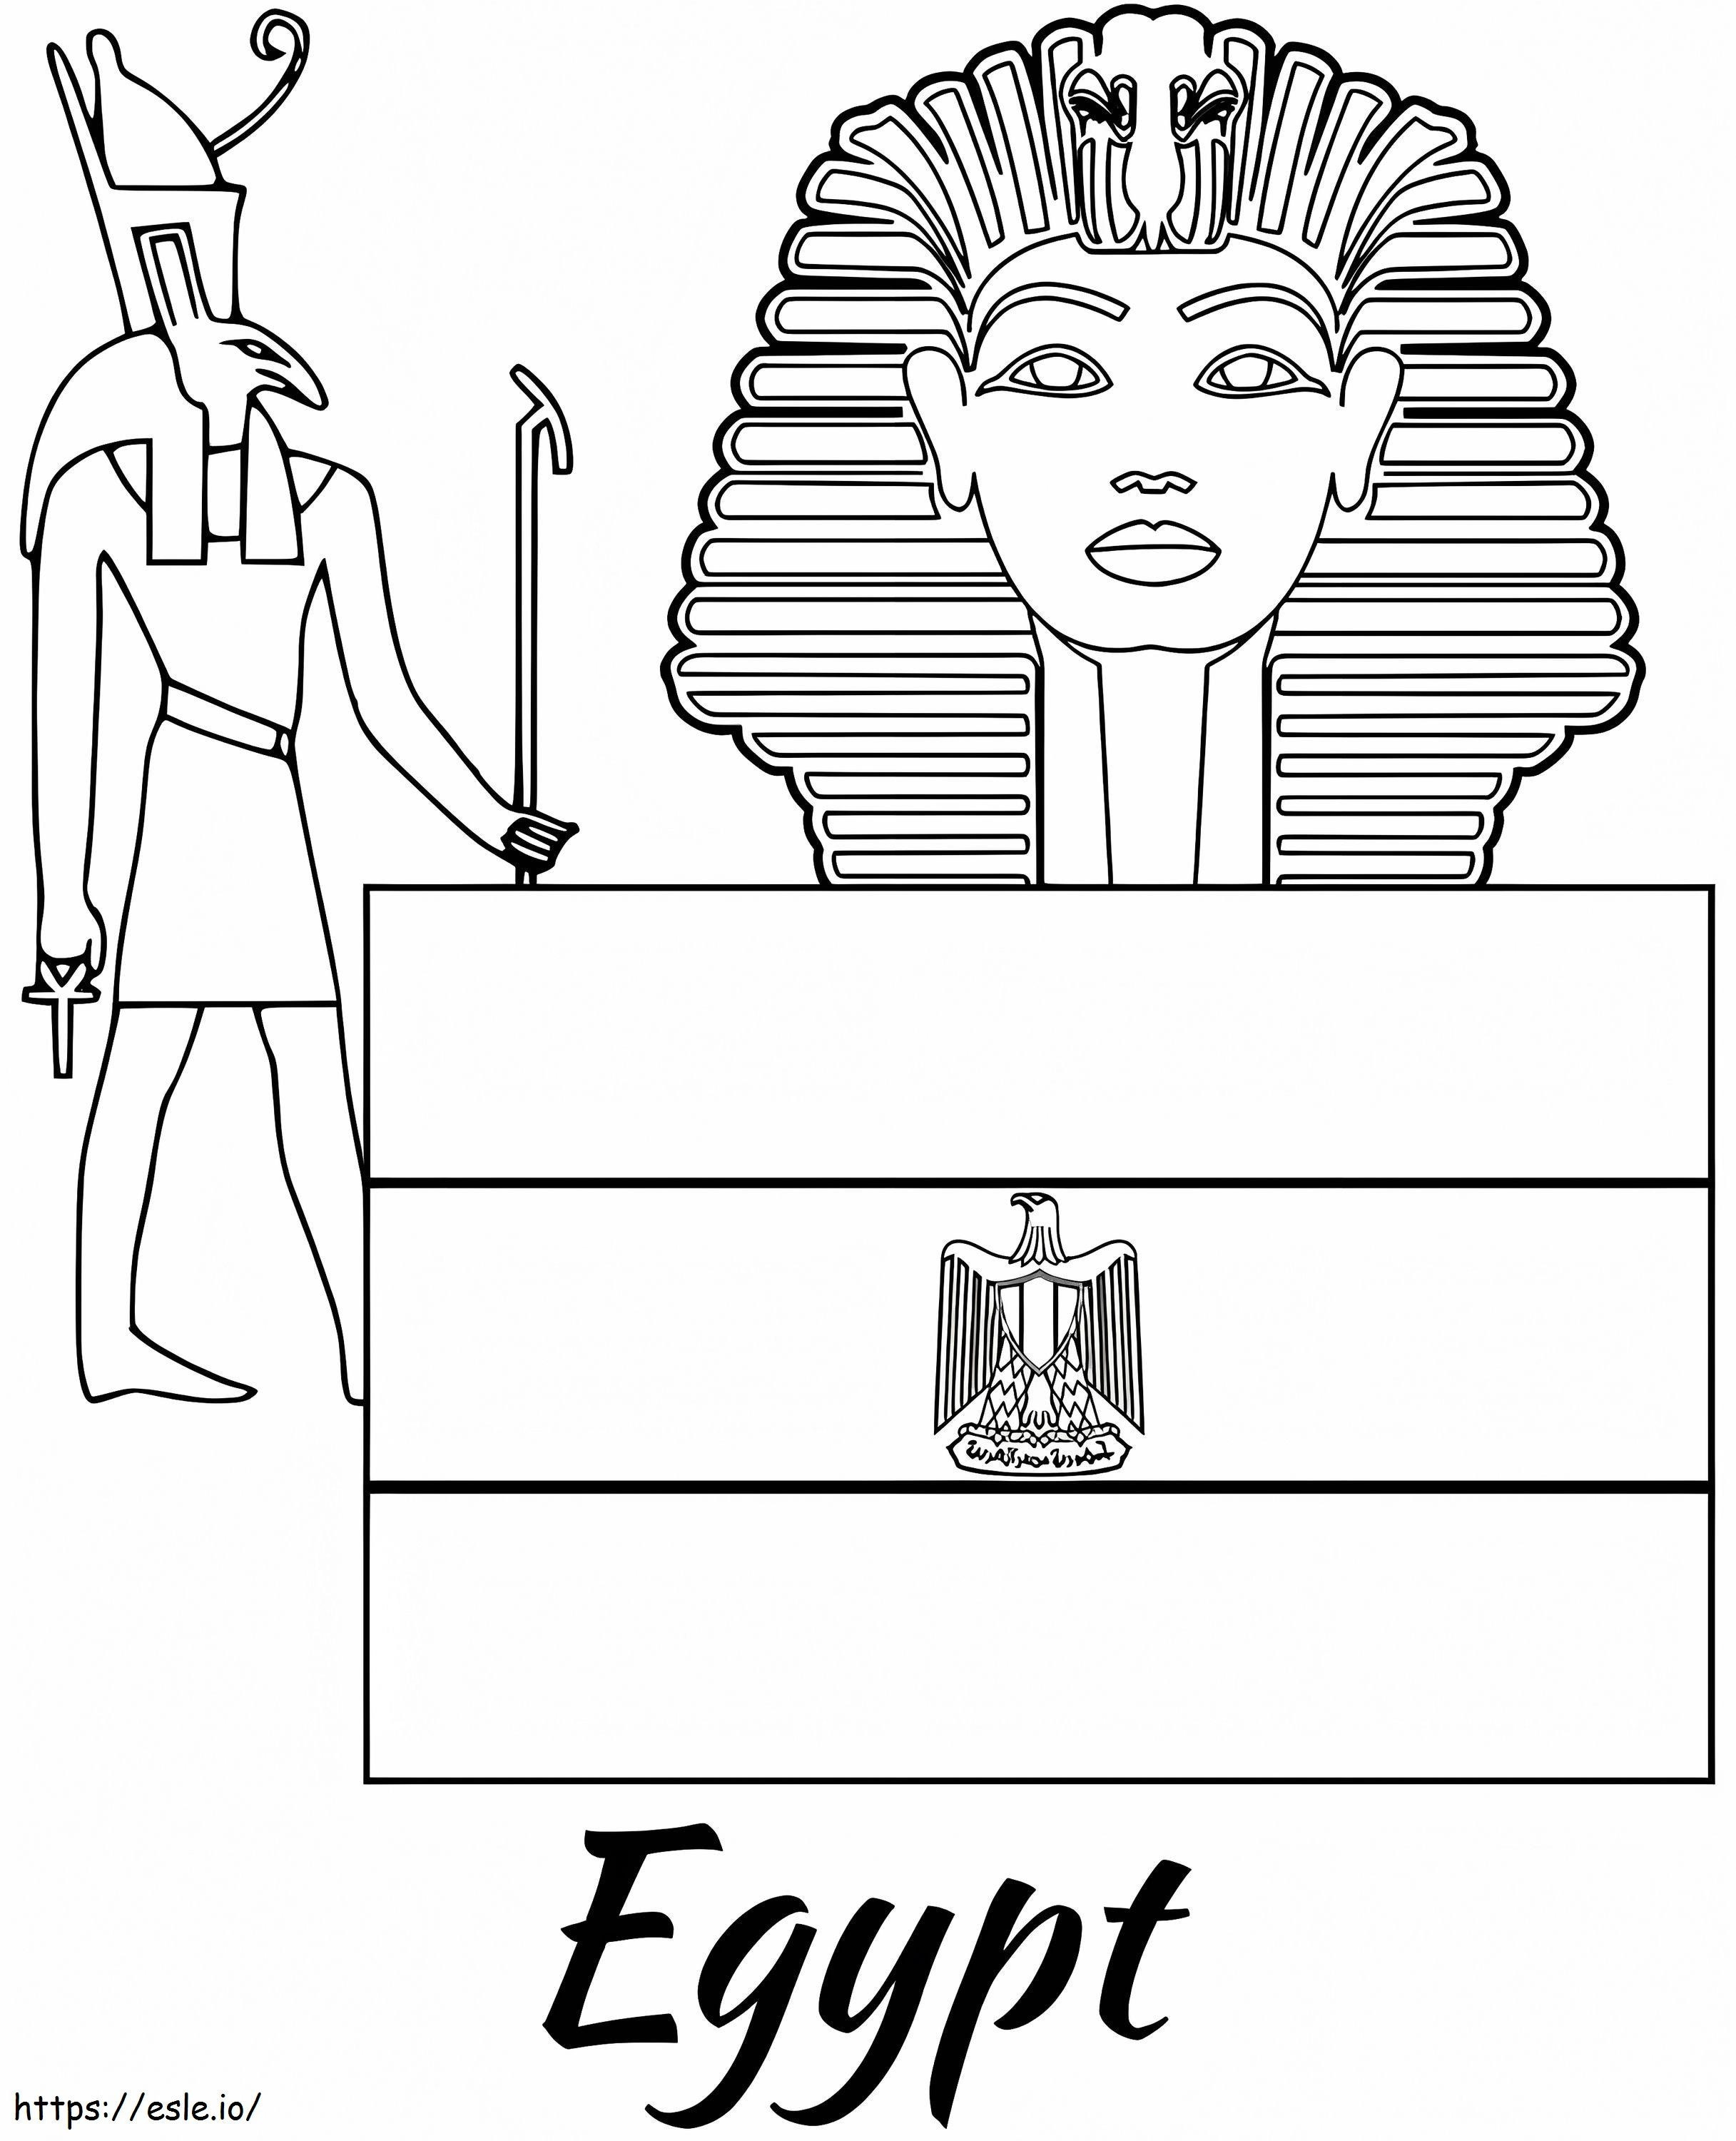 Egypt Symbols coloring page